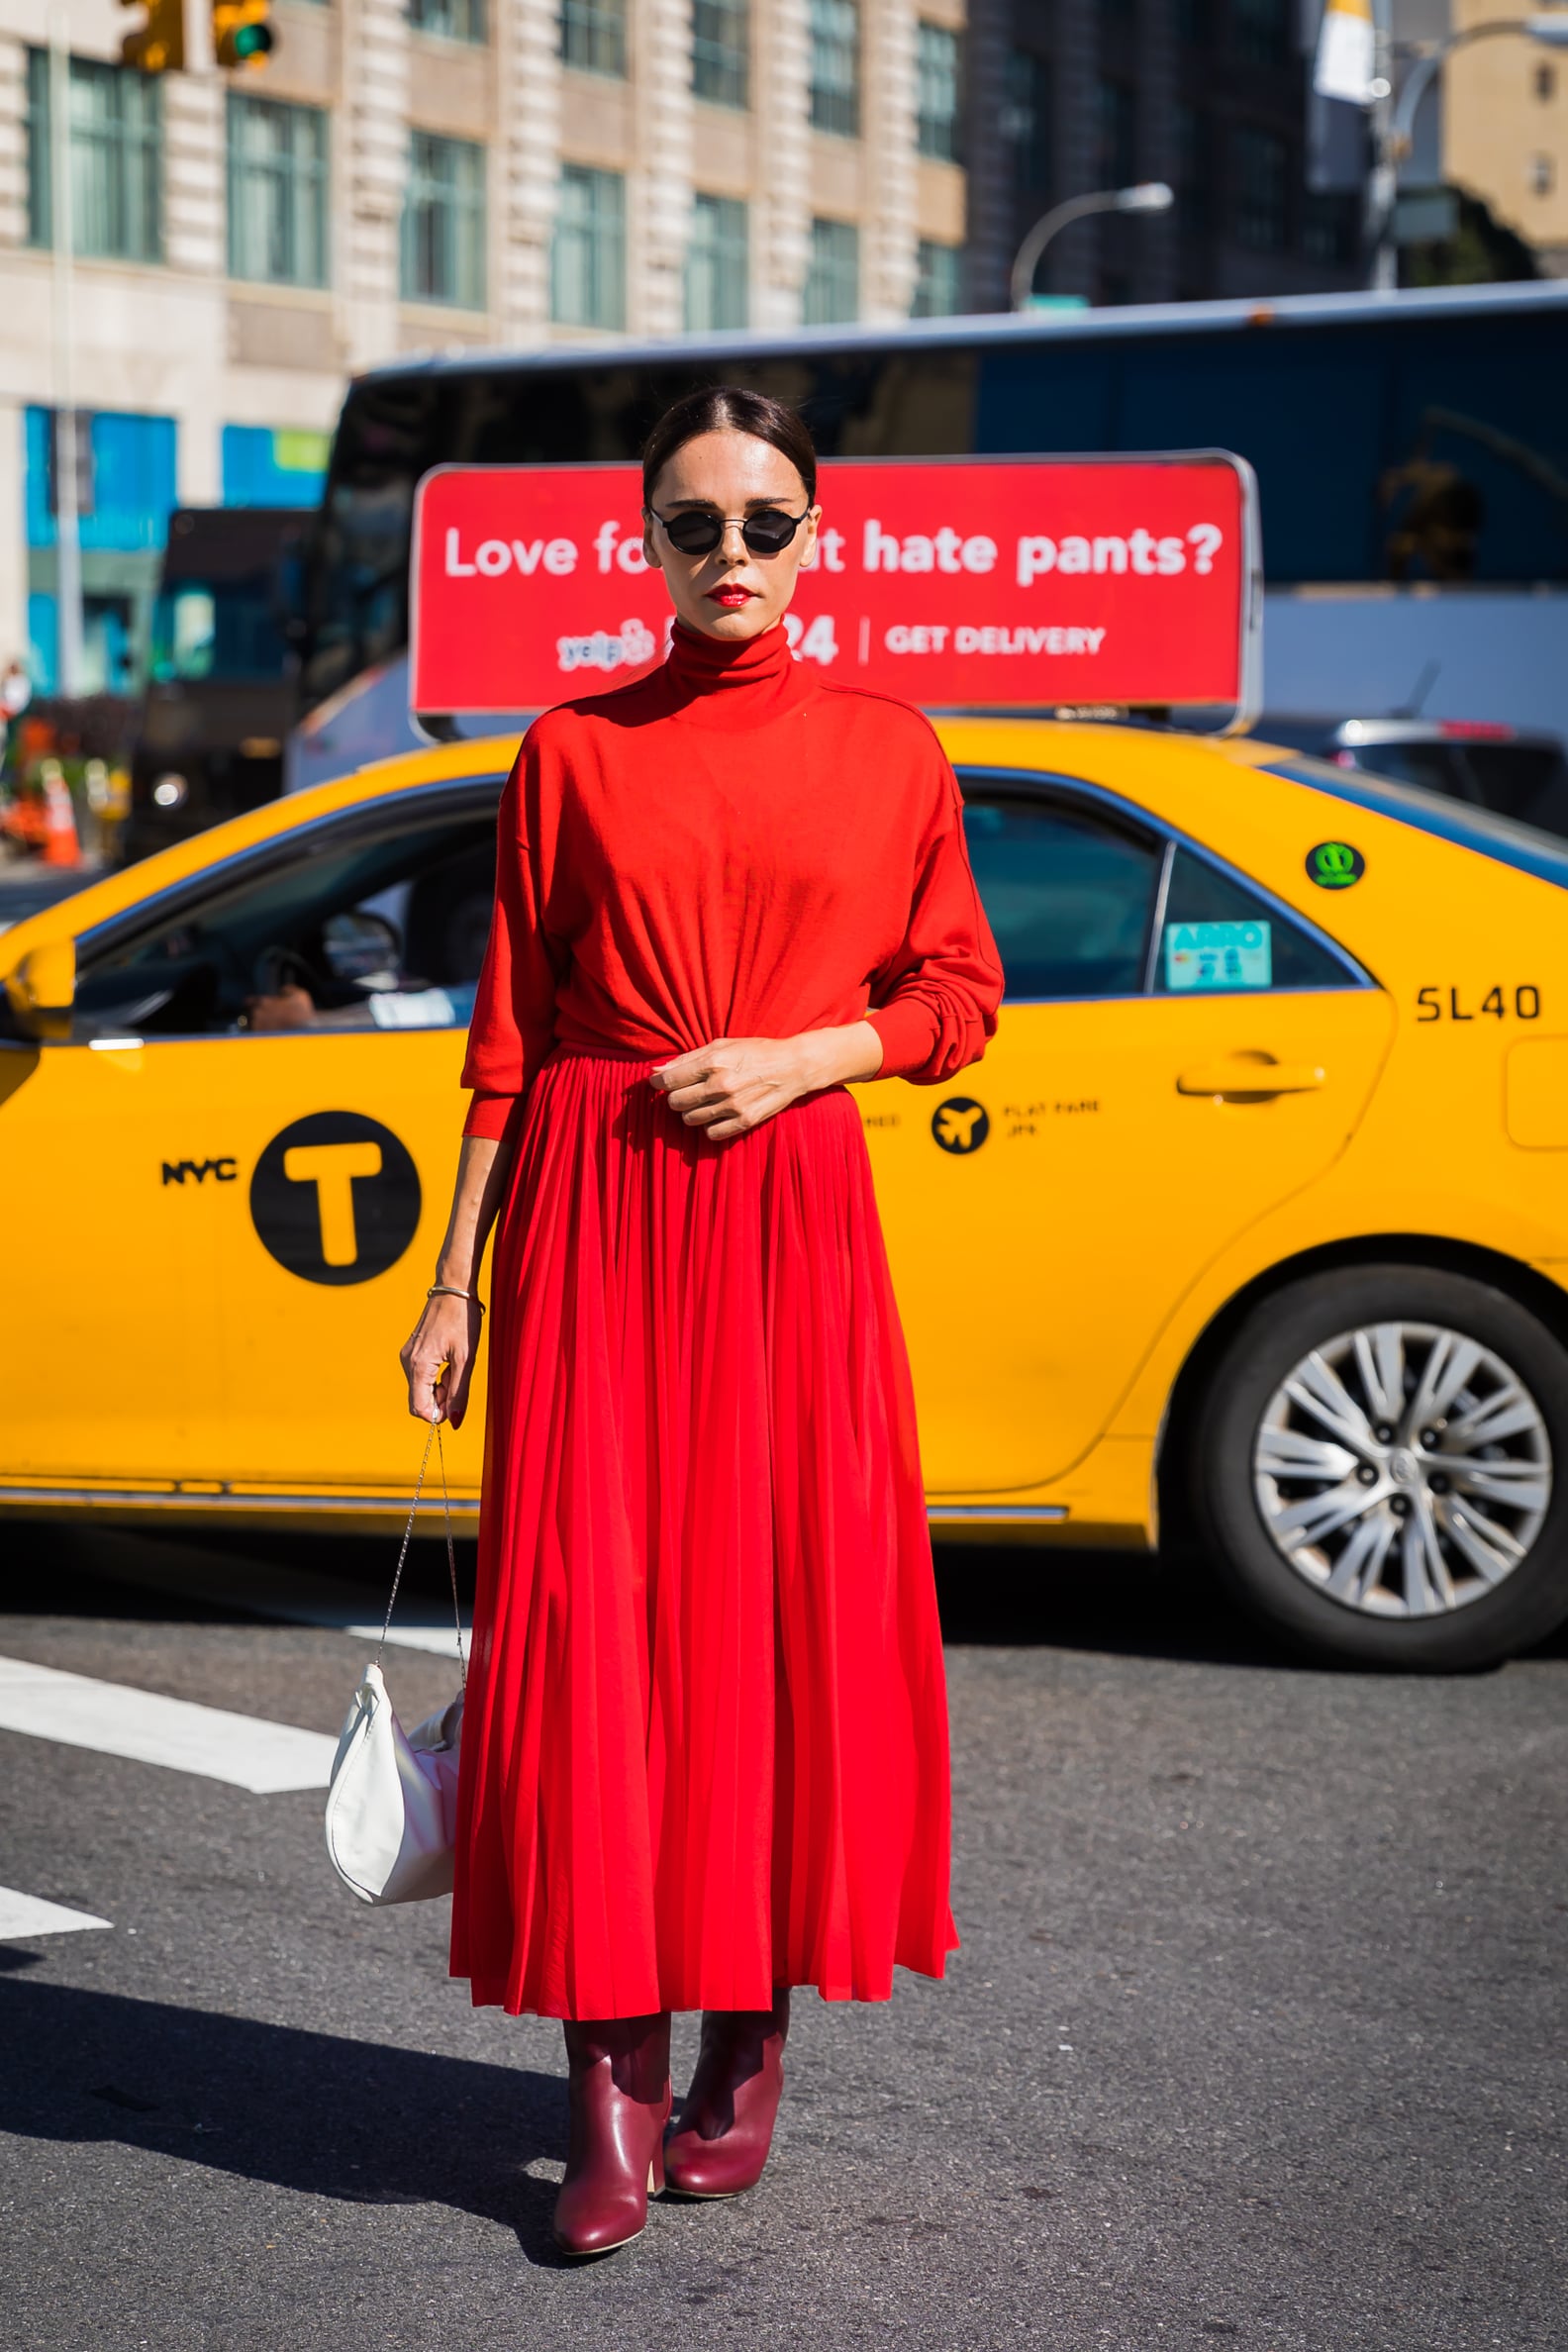 Red Outfit Inspiration | POPSUGAR Fashion